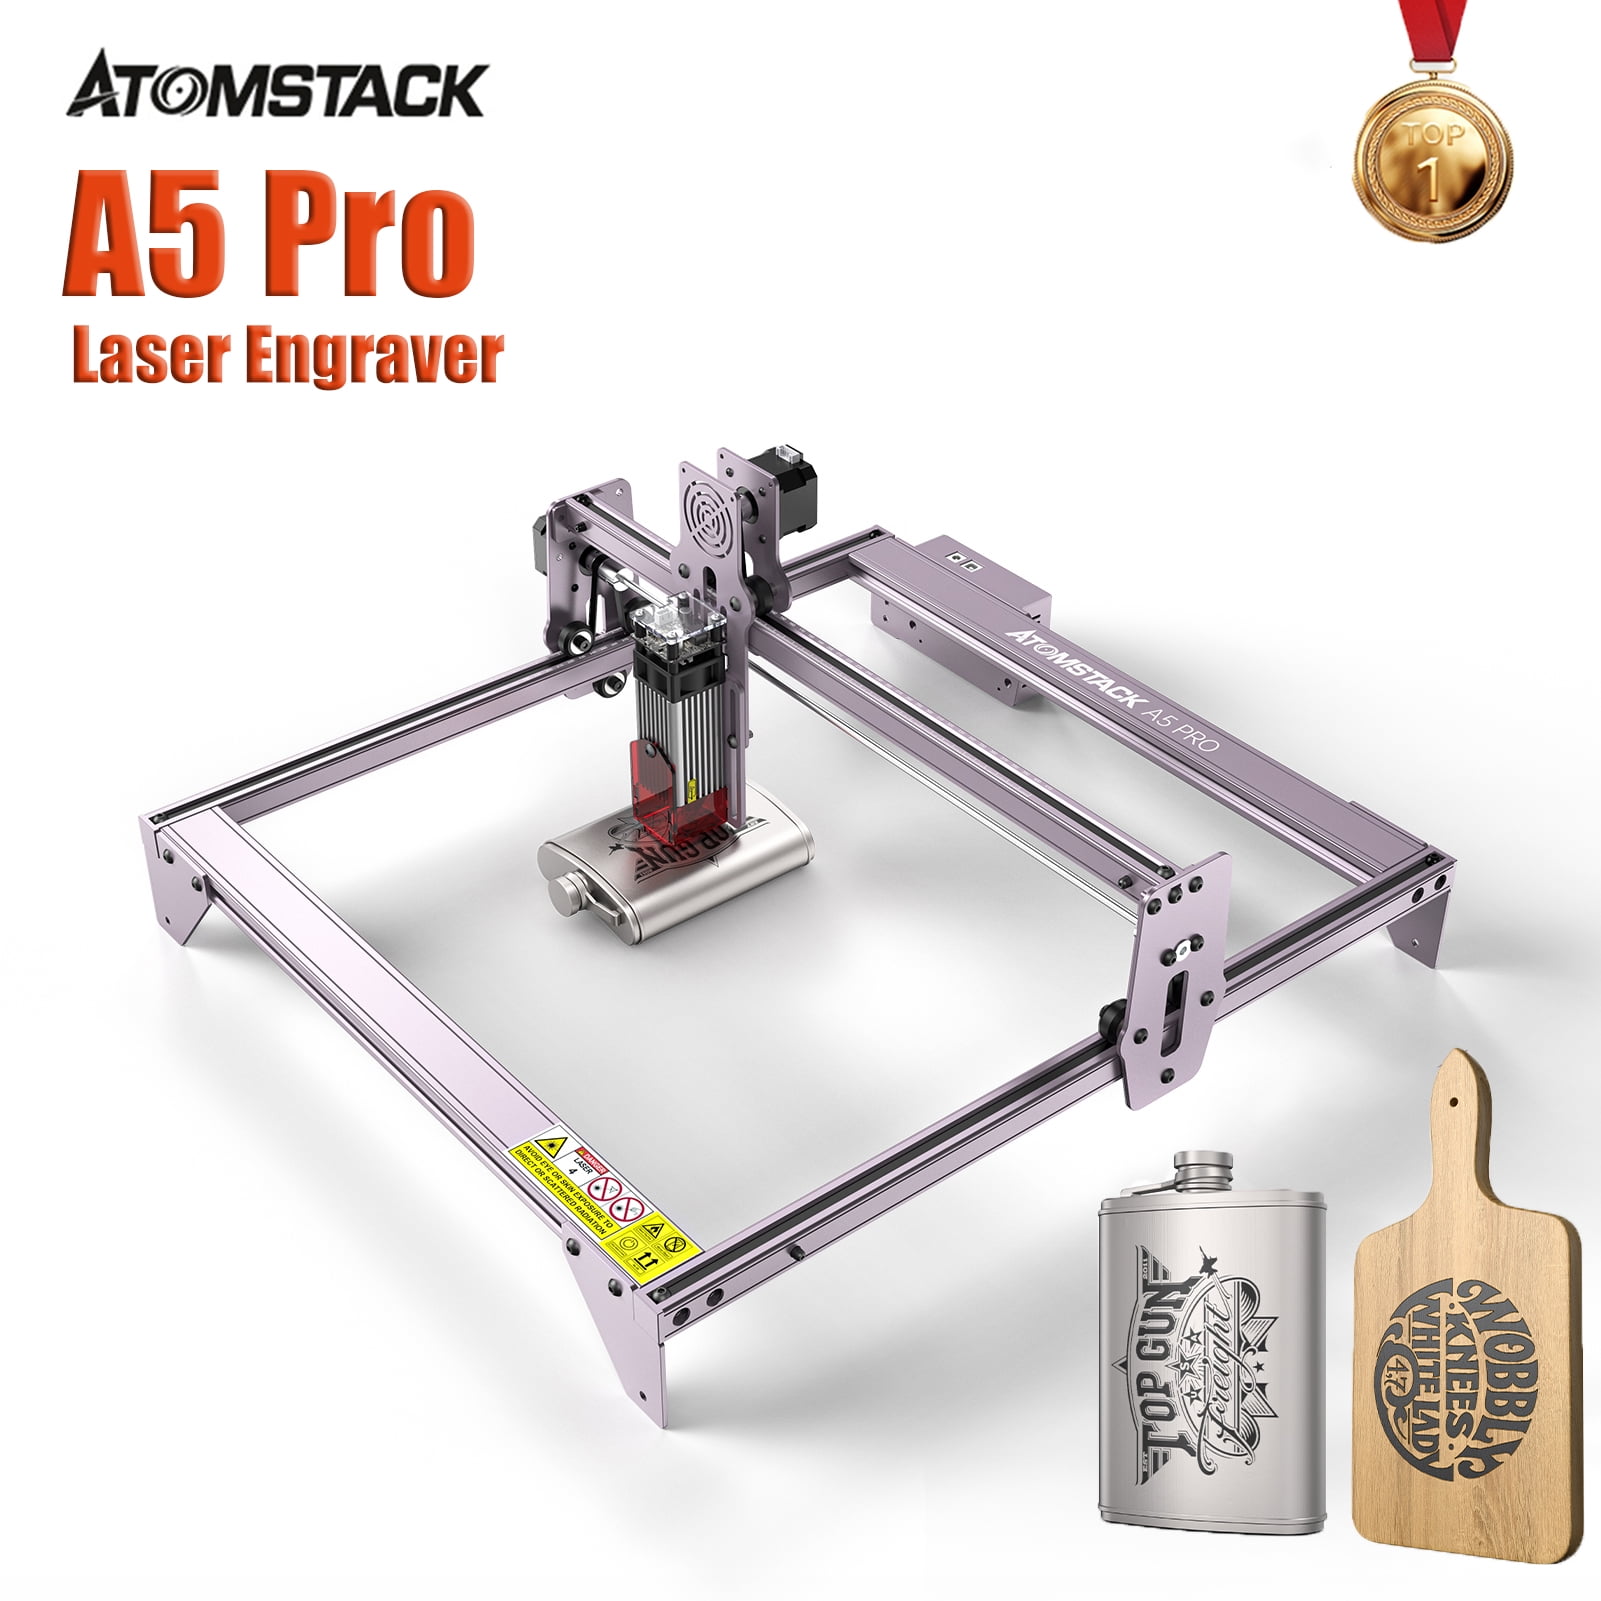 ATOMSTACK A5 Pro 40W Fixed-Focus Laser Engraver Engraving Cutting Machine  P6H3